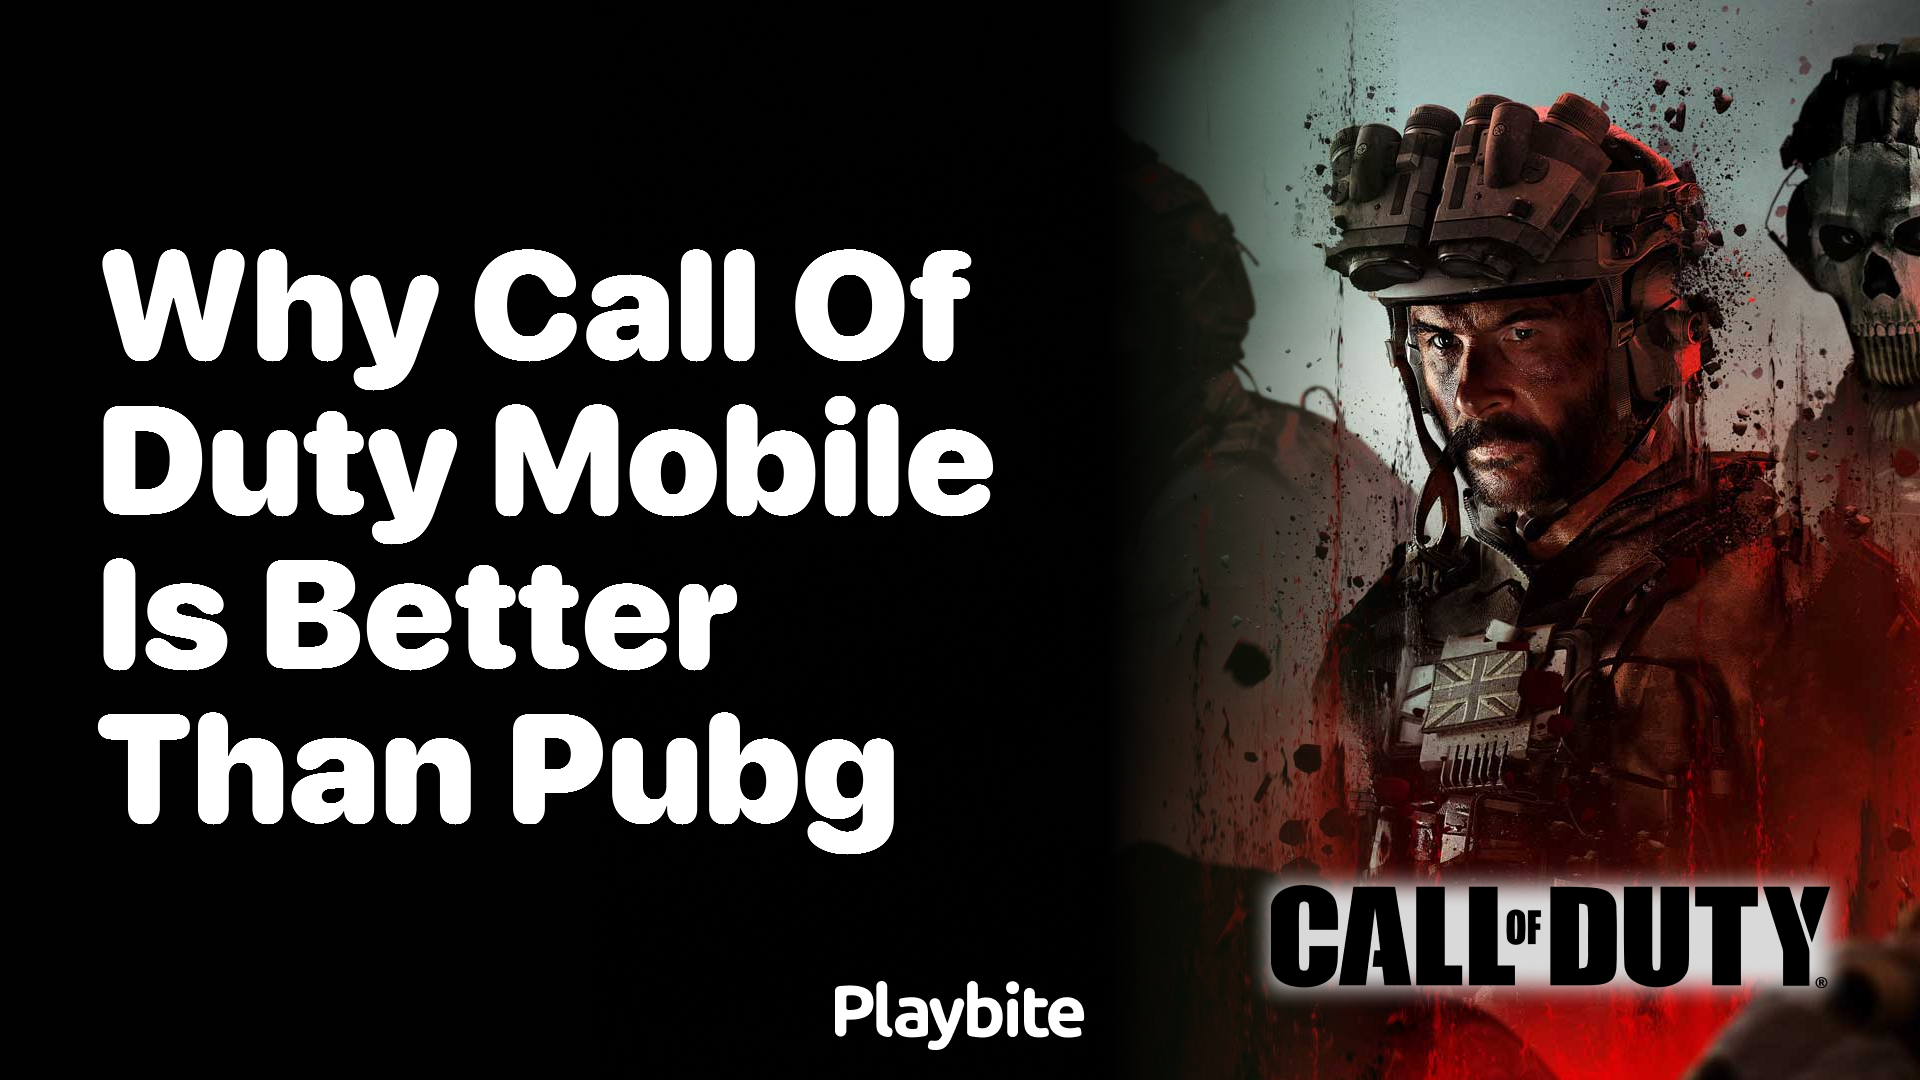 Why Call of Duty Mobile is Better Than PUBG